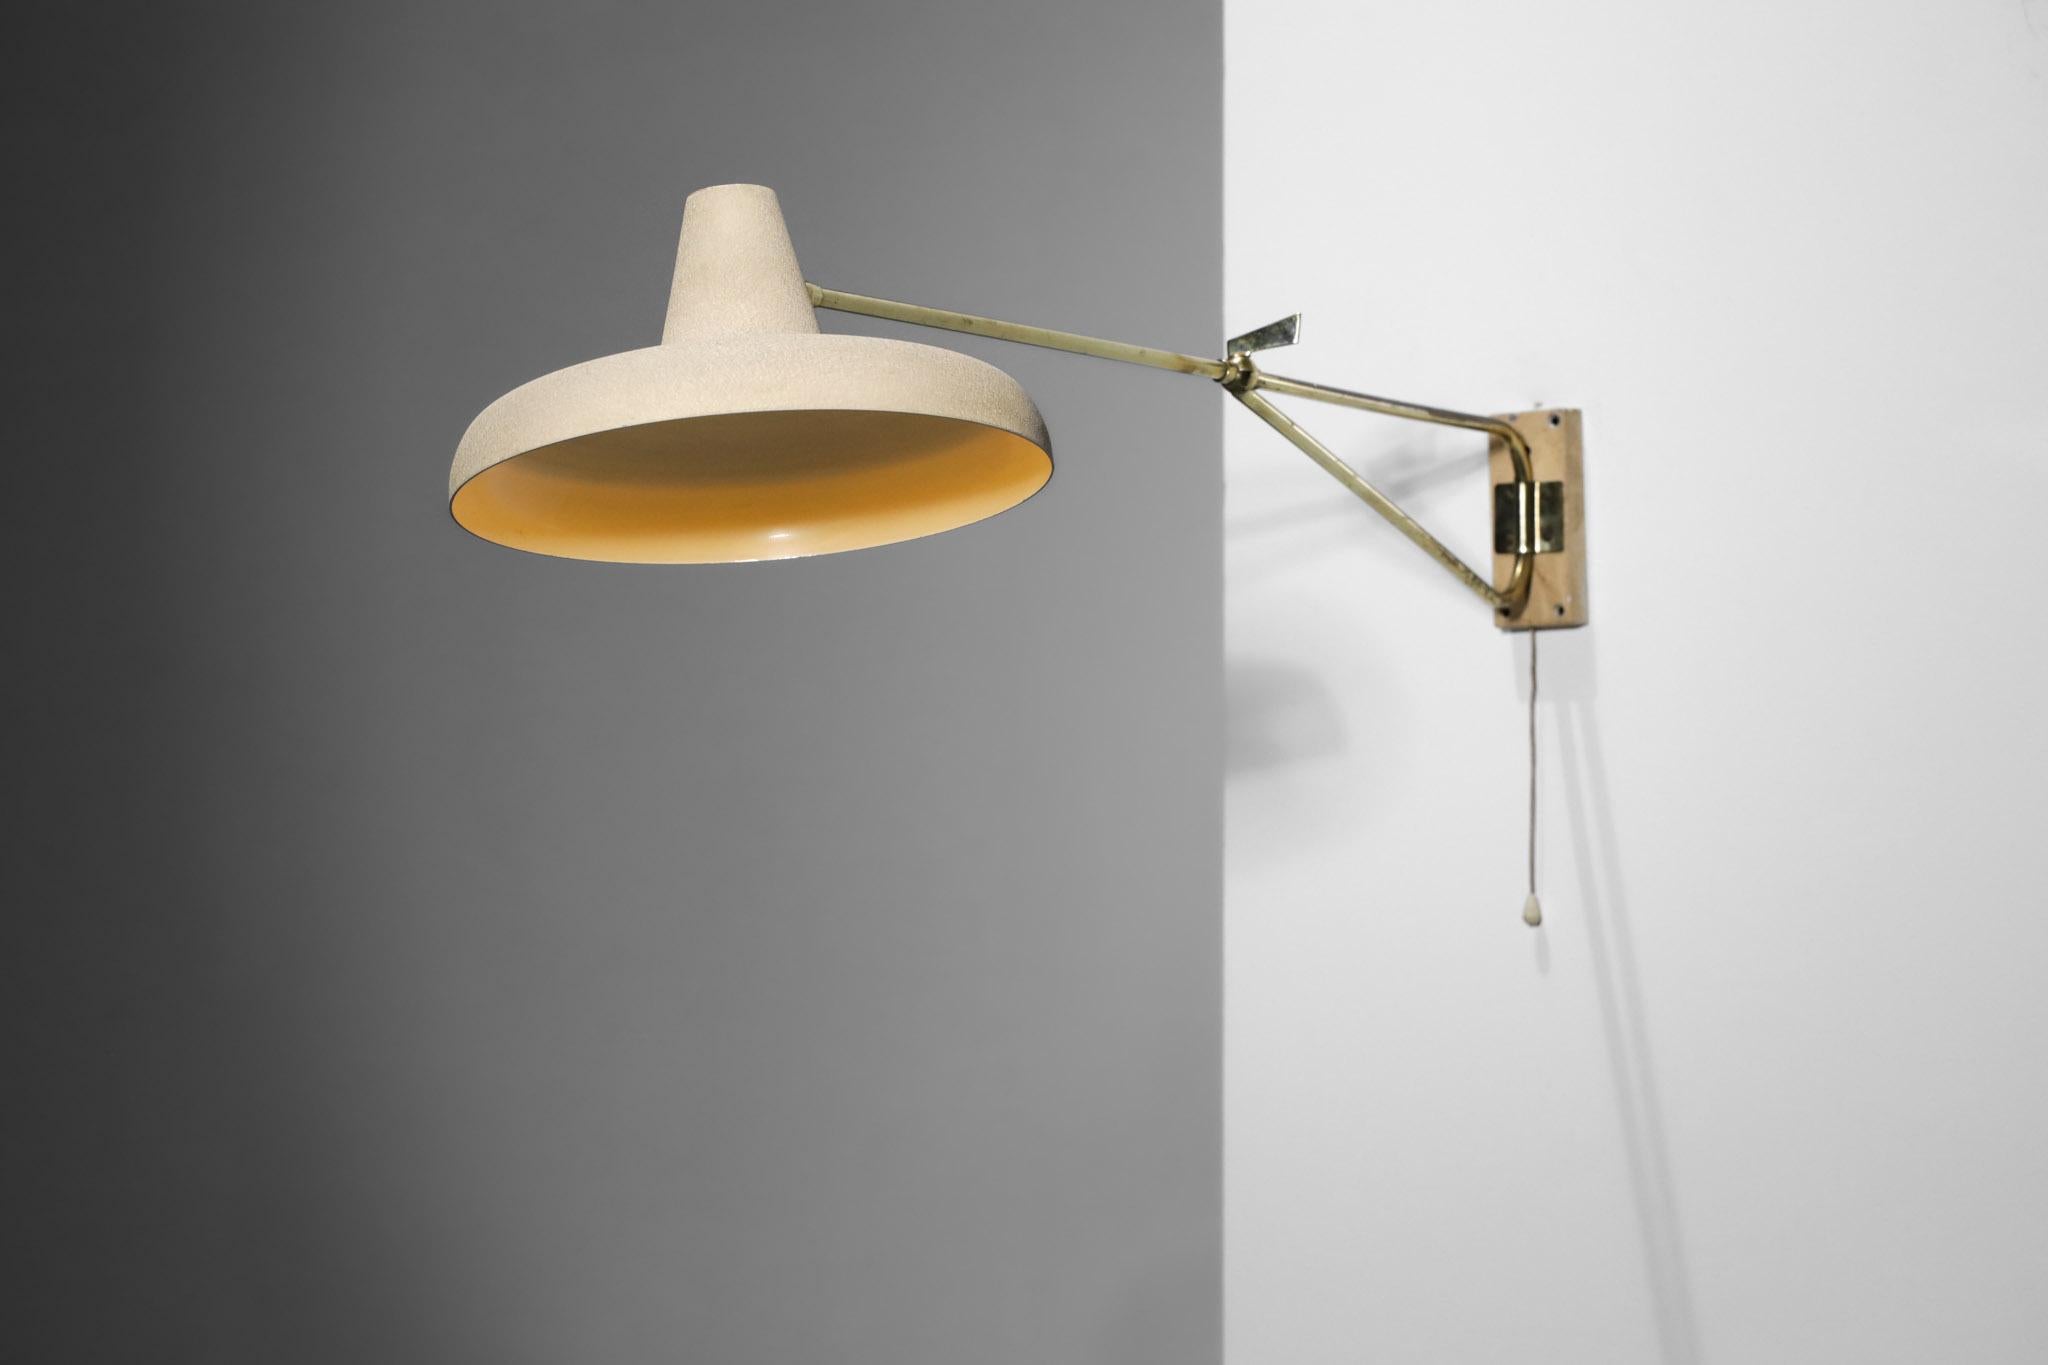 Articulated wall lamp from the 50's in the style of Lunel's work. Articulated arm in solid brass allowing to orientate the lamp in different positions. Shade and wall plate in lacquered metal with original beige vermiculated paint. Very nice vintage